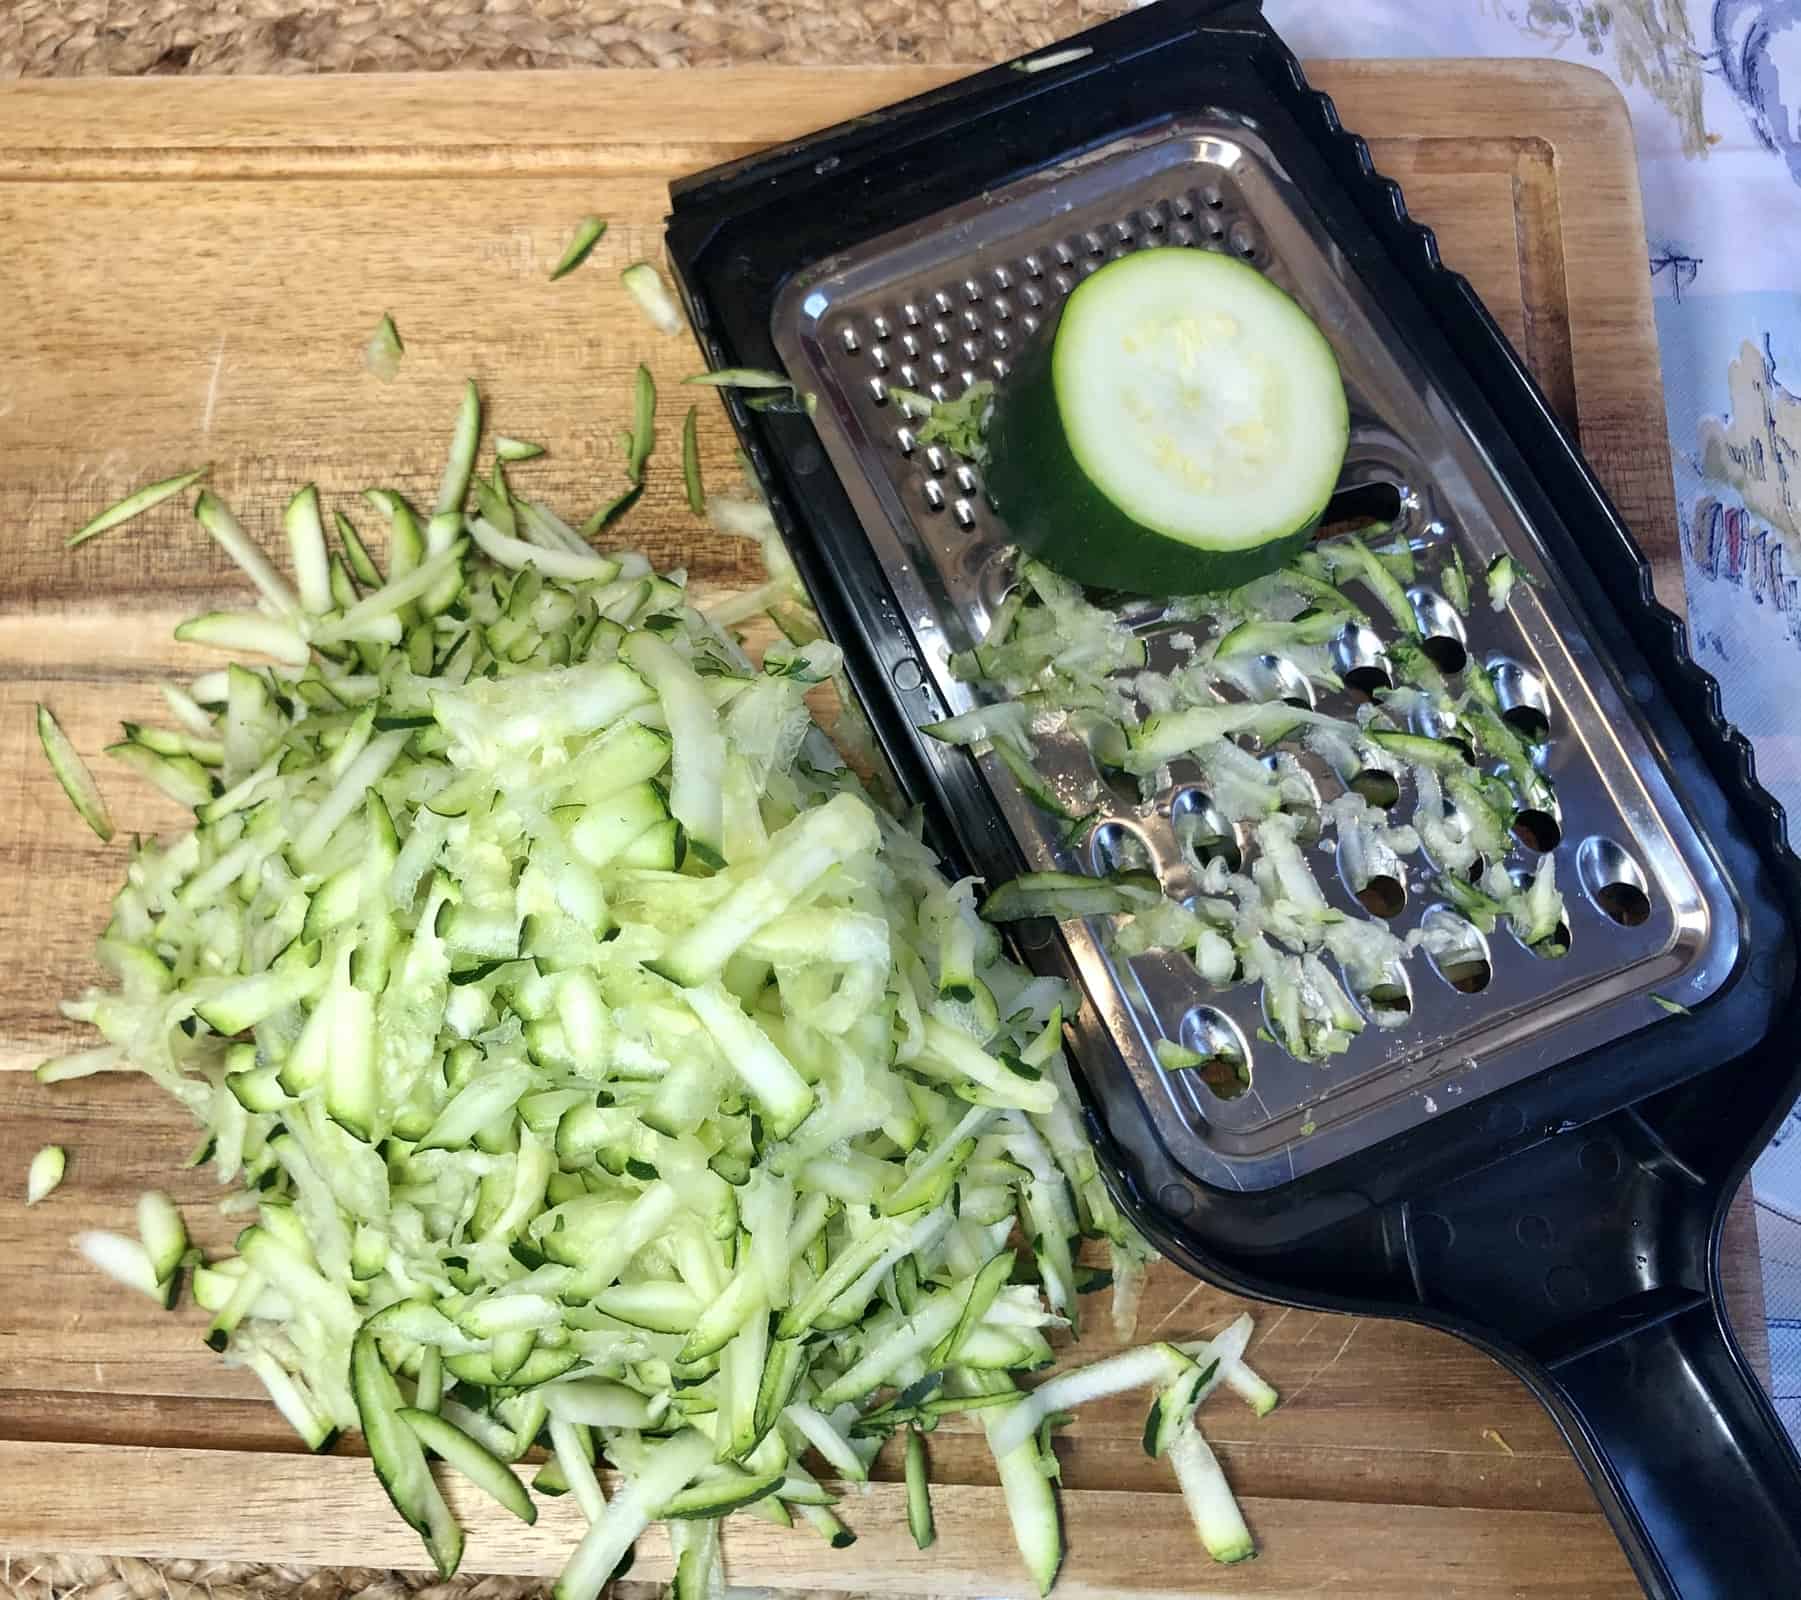 Grated Zucchini on a wooden cutting board with a black grater and zucchini on the side